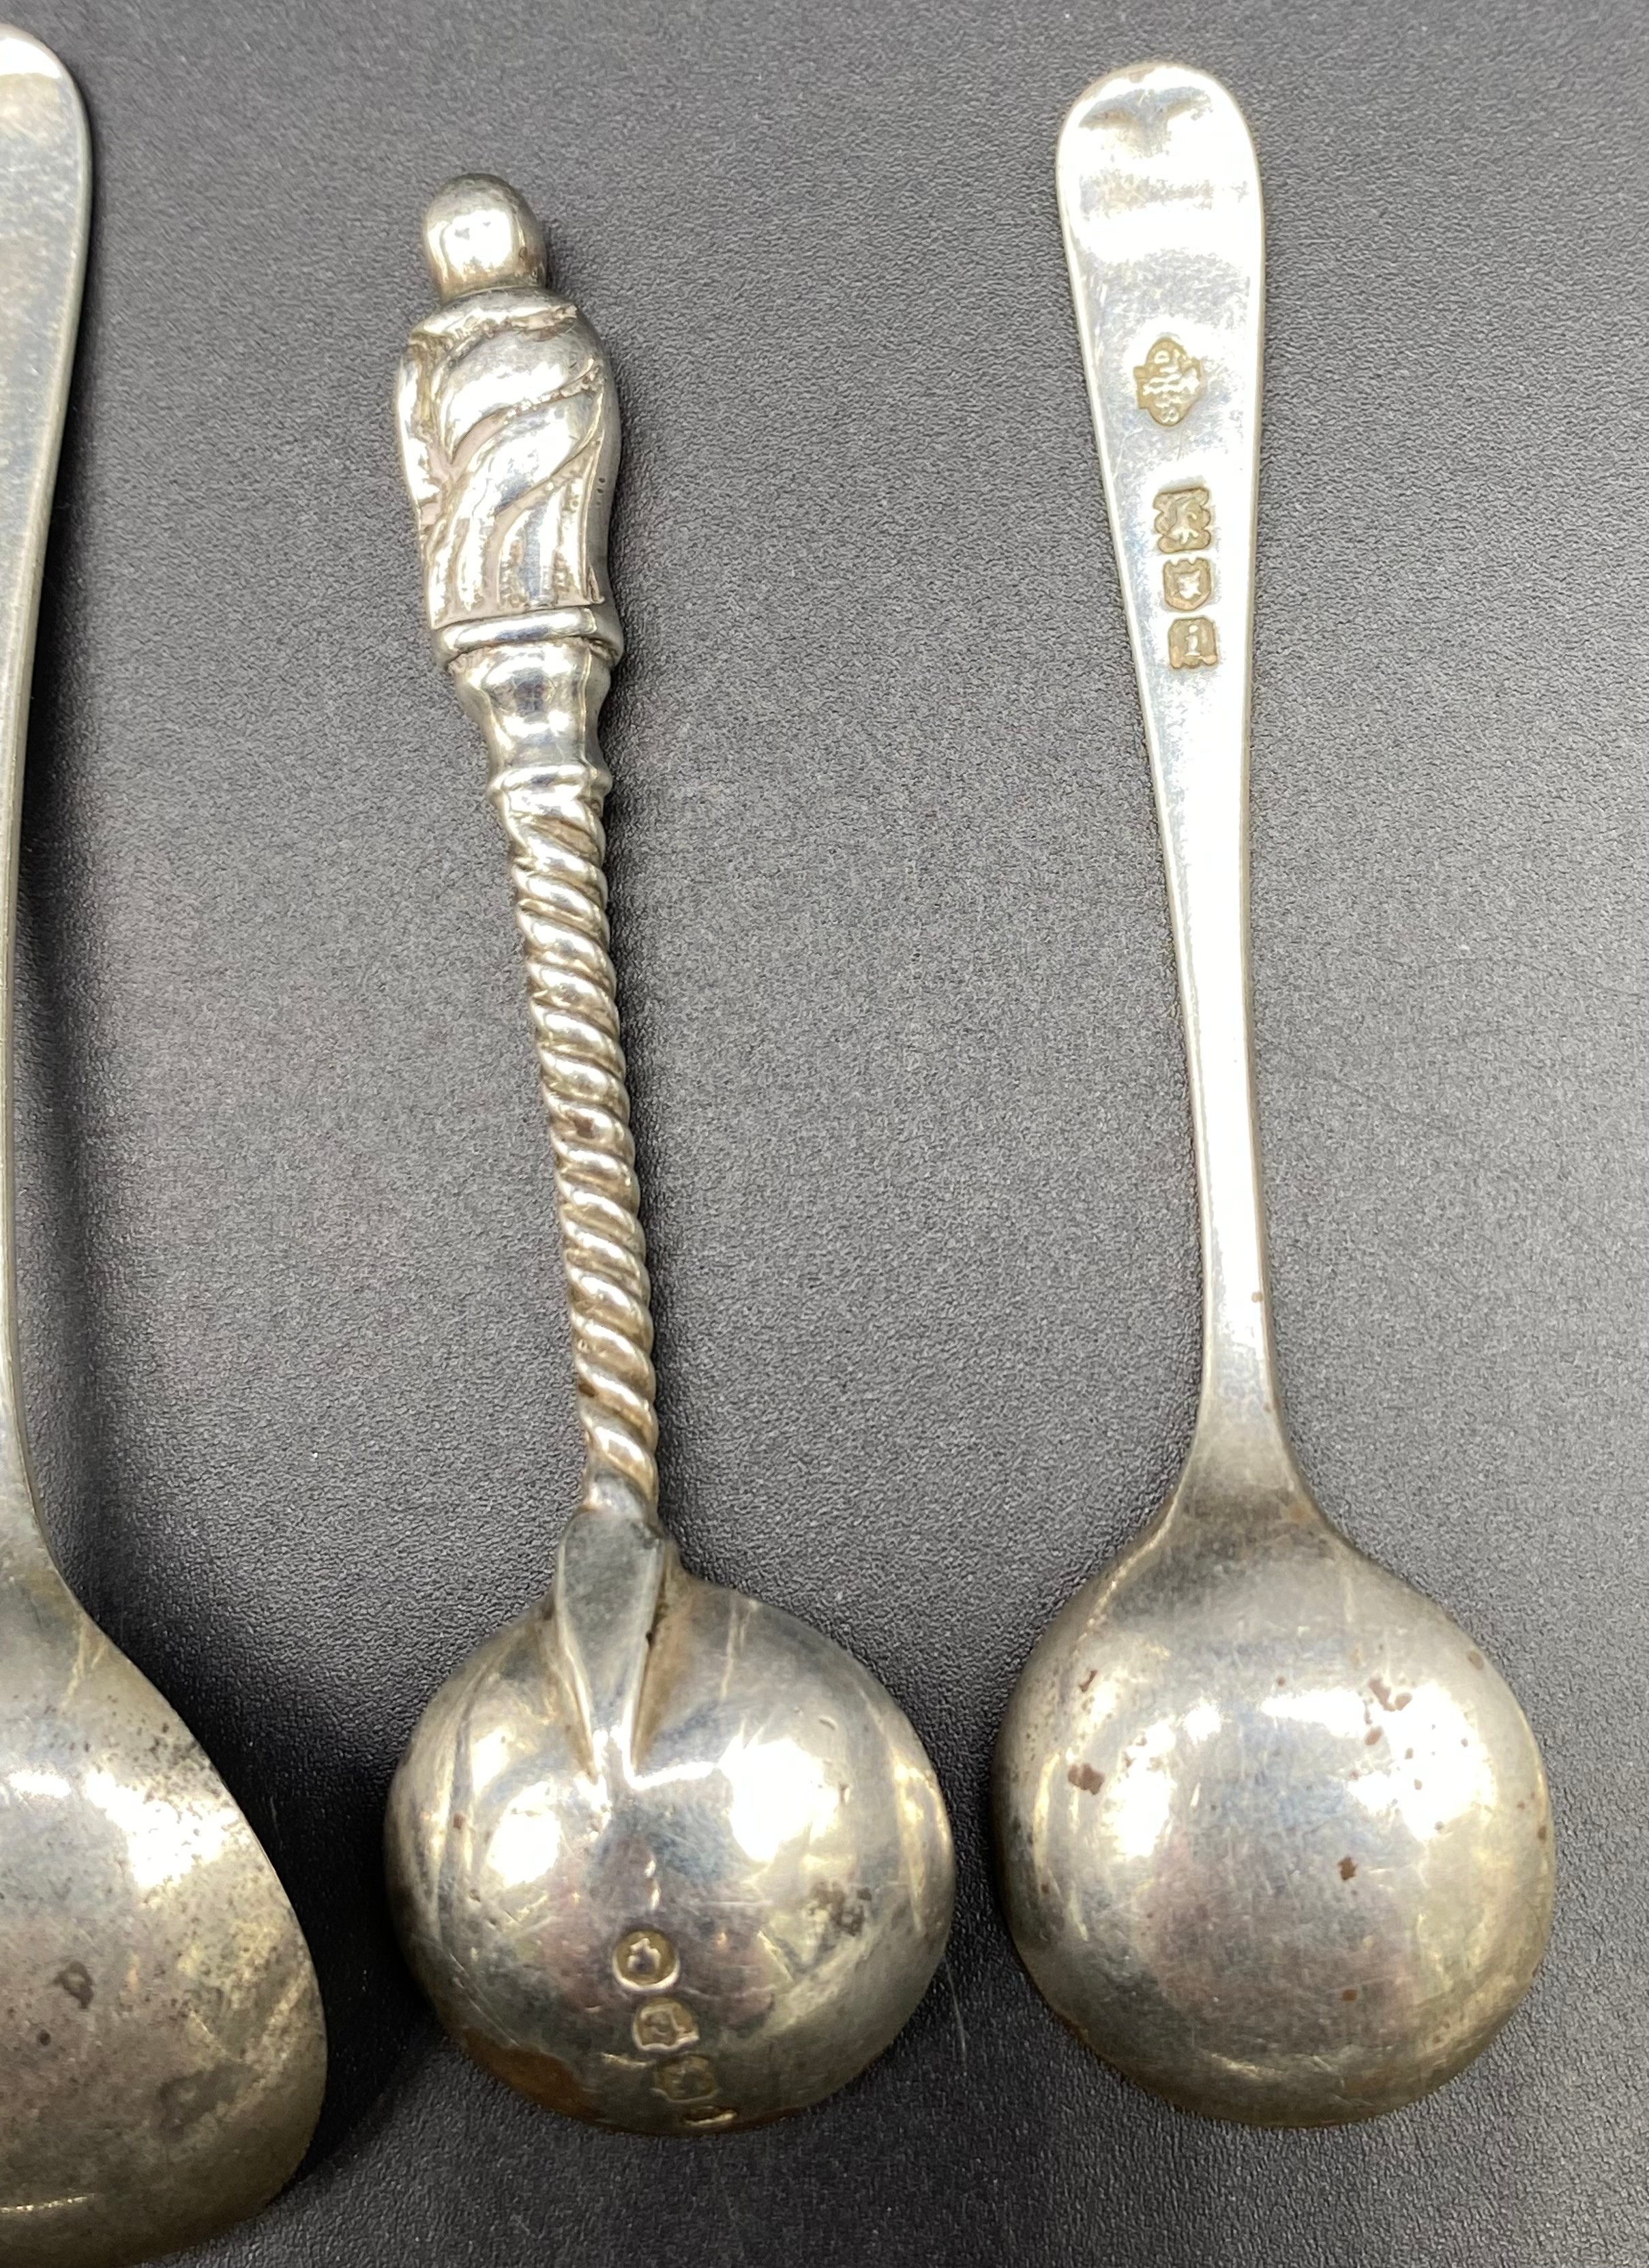 Silver hallmarked flat wares; spoons & fork [144.51] grams - Image 7 of 7